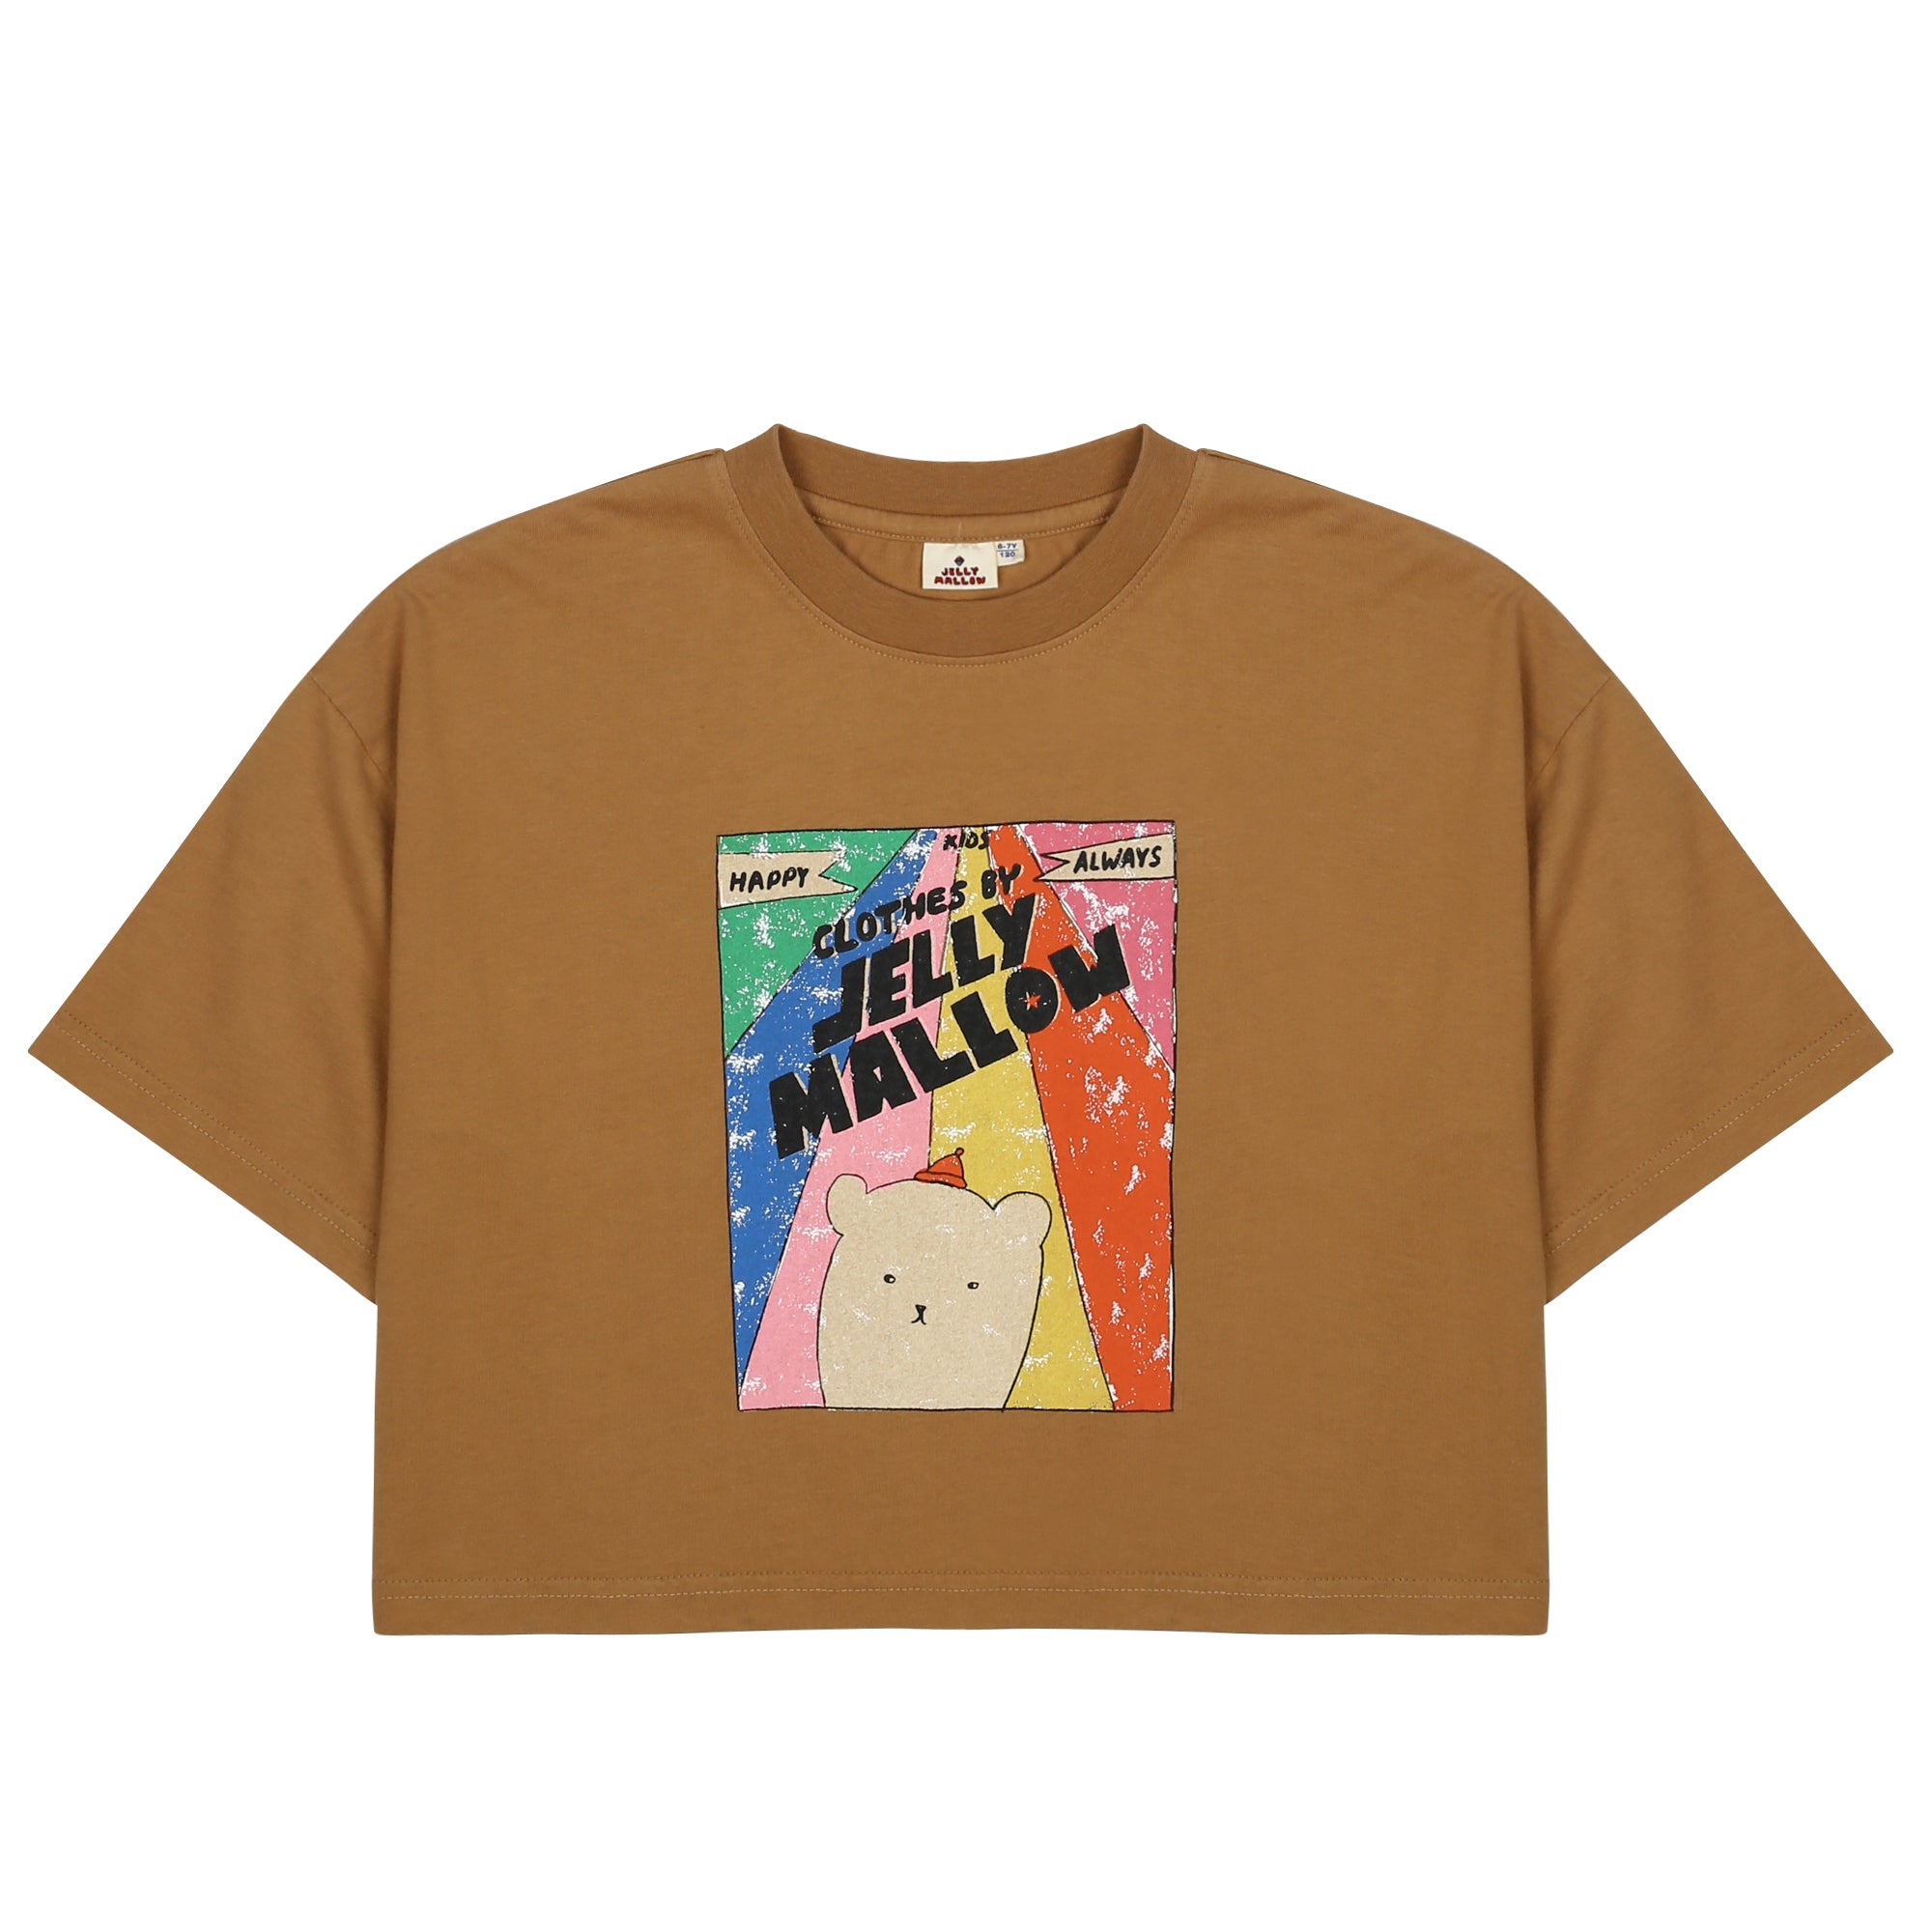 Cereal T-Shirt